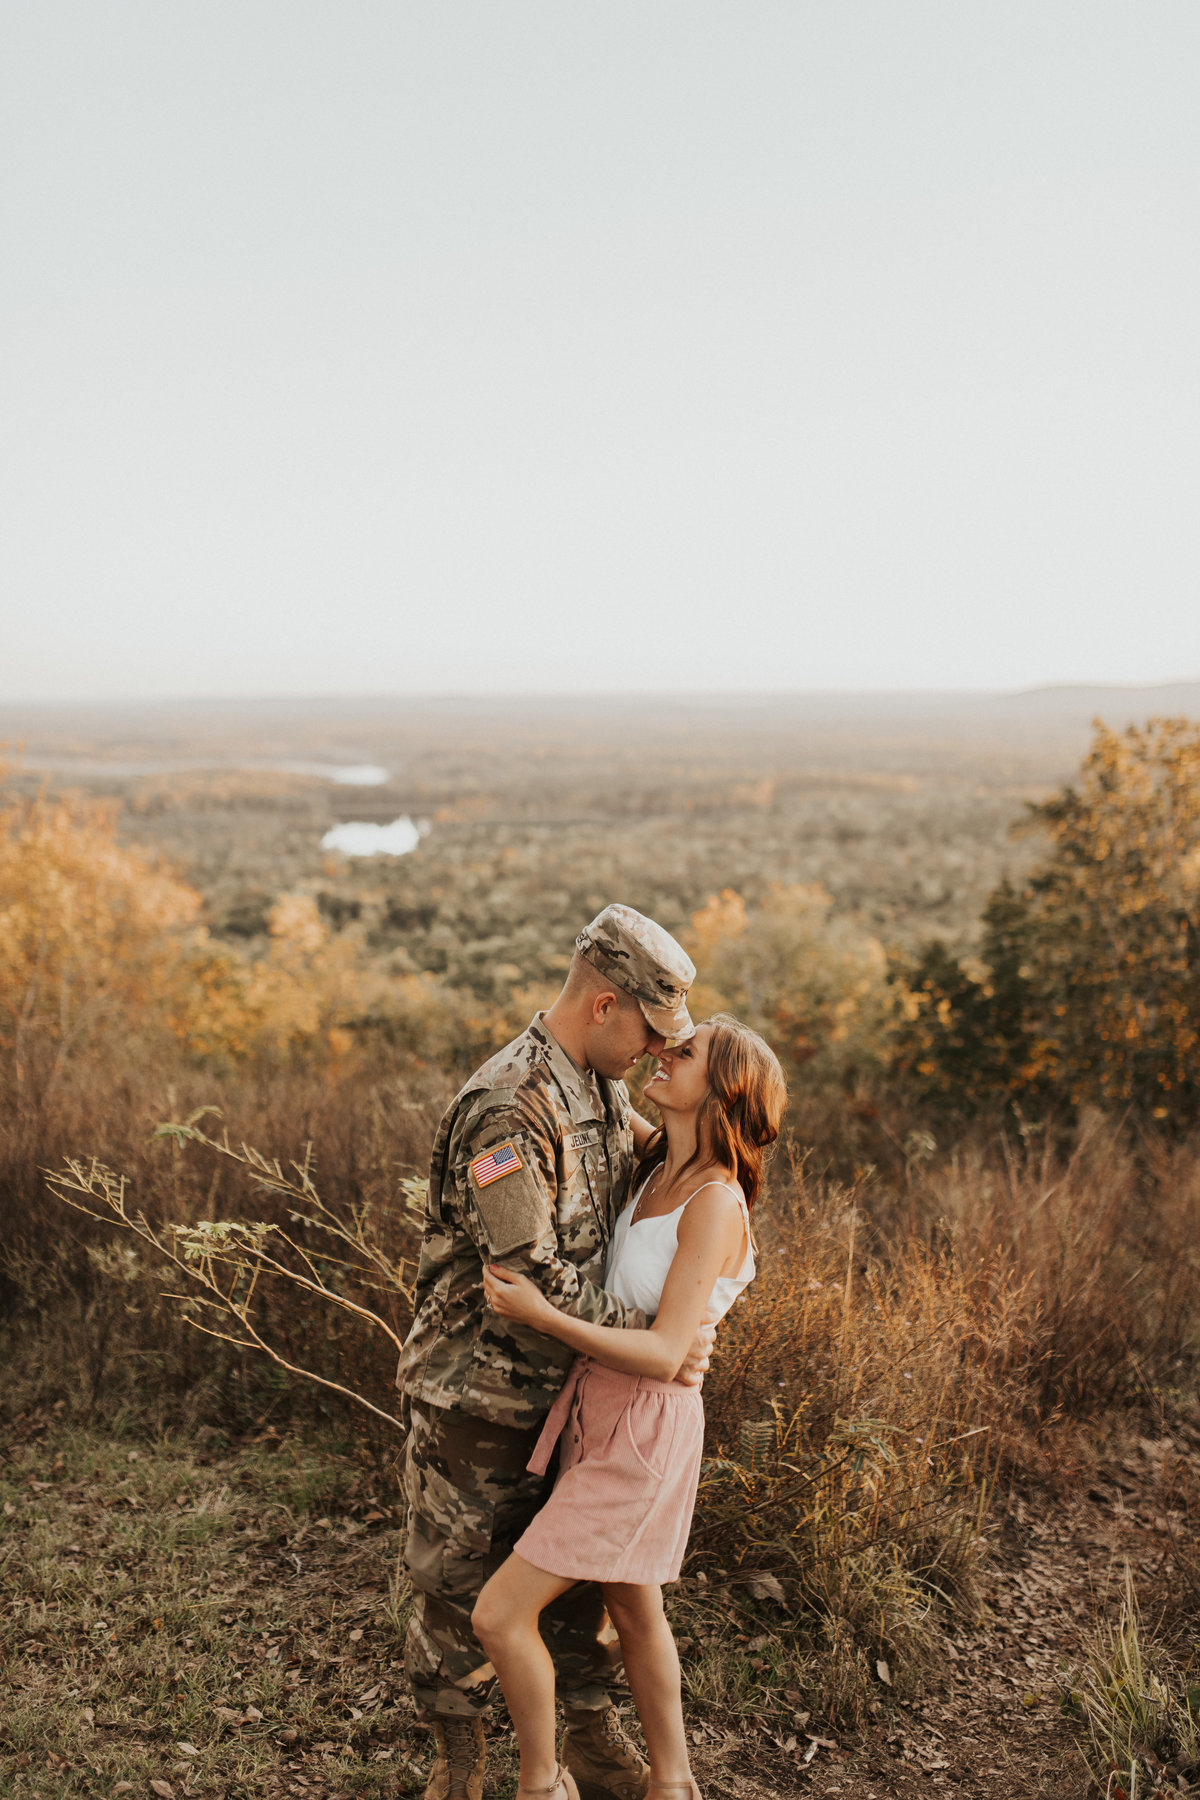 engaged couple standing outside, man is in a military outfit, woman is in a white top and pink shorts